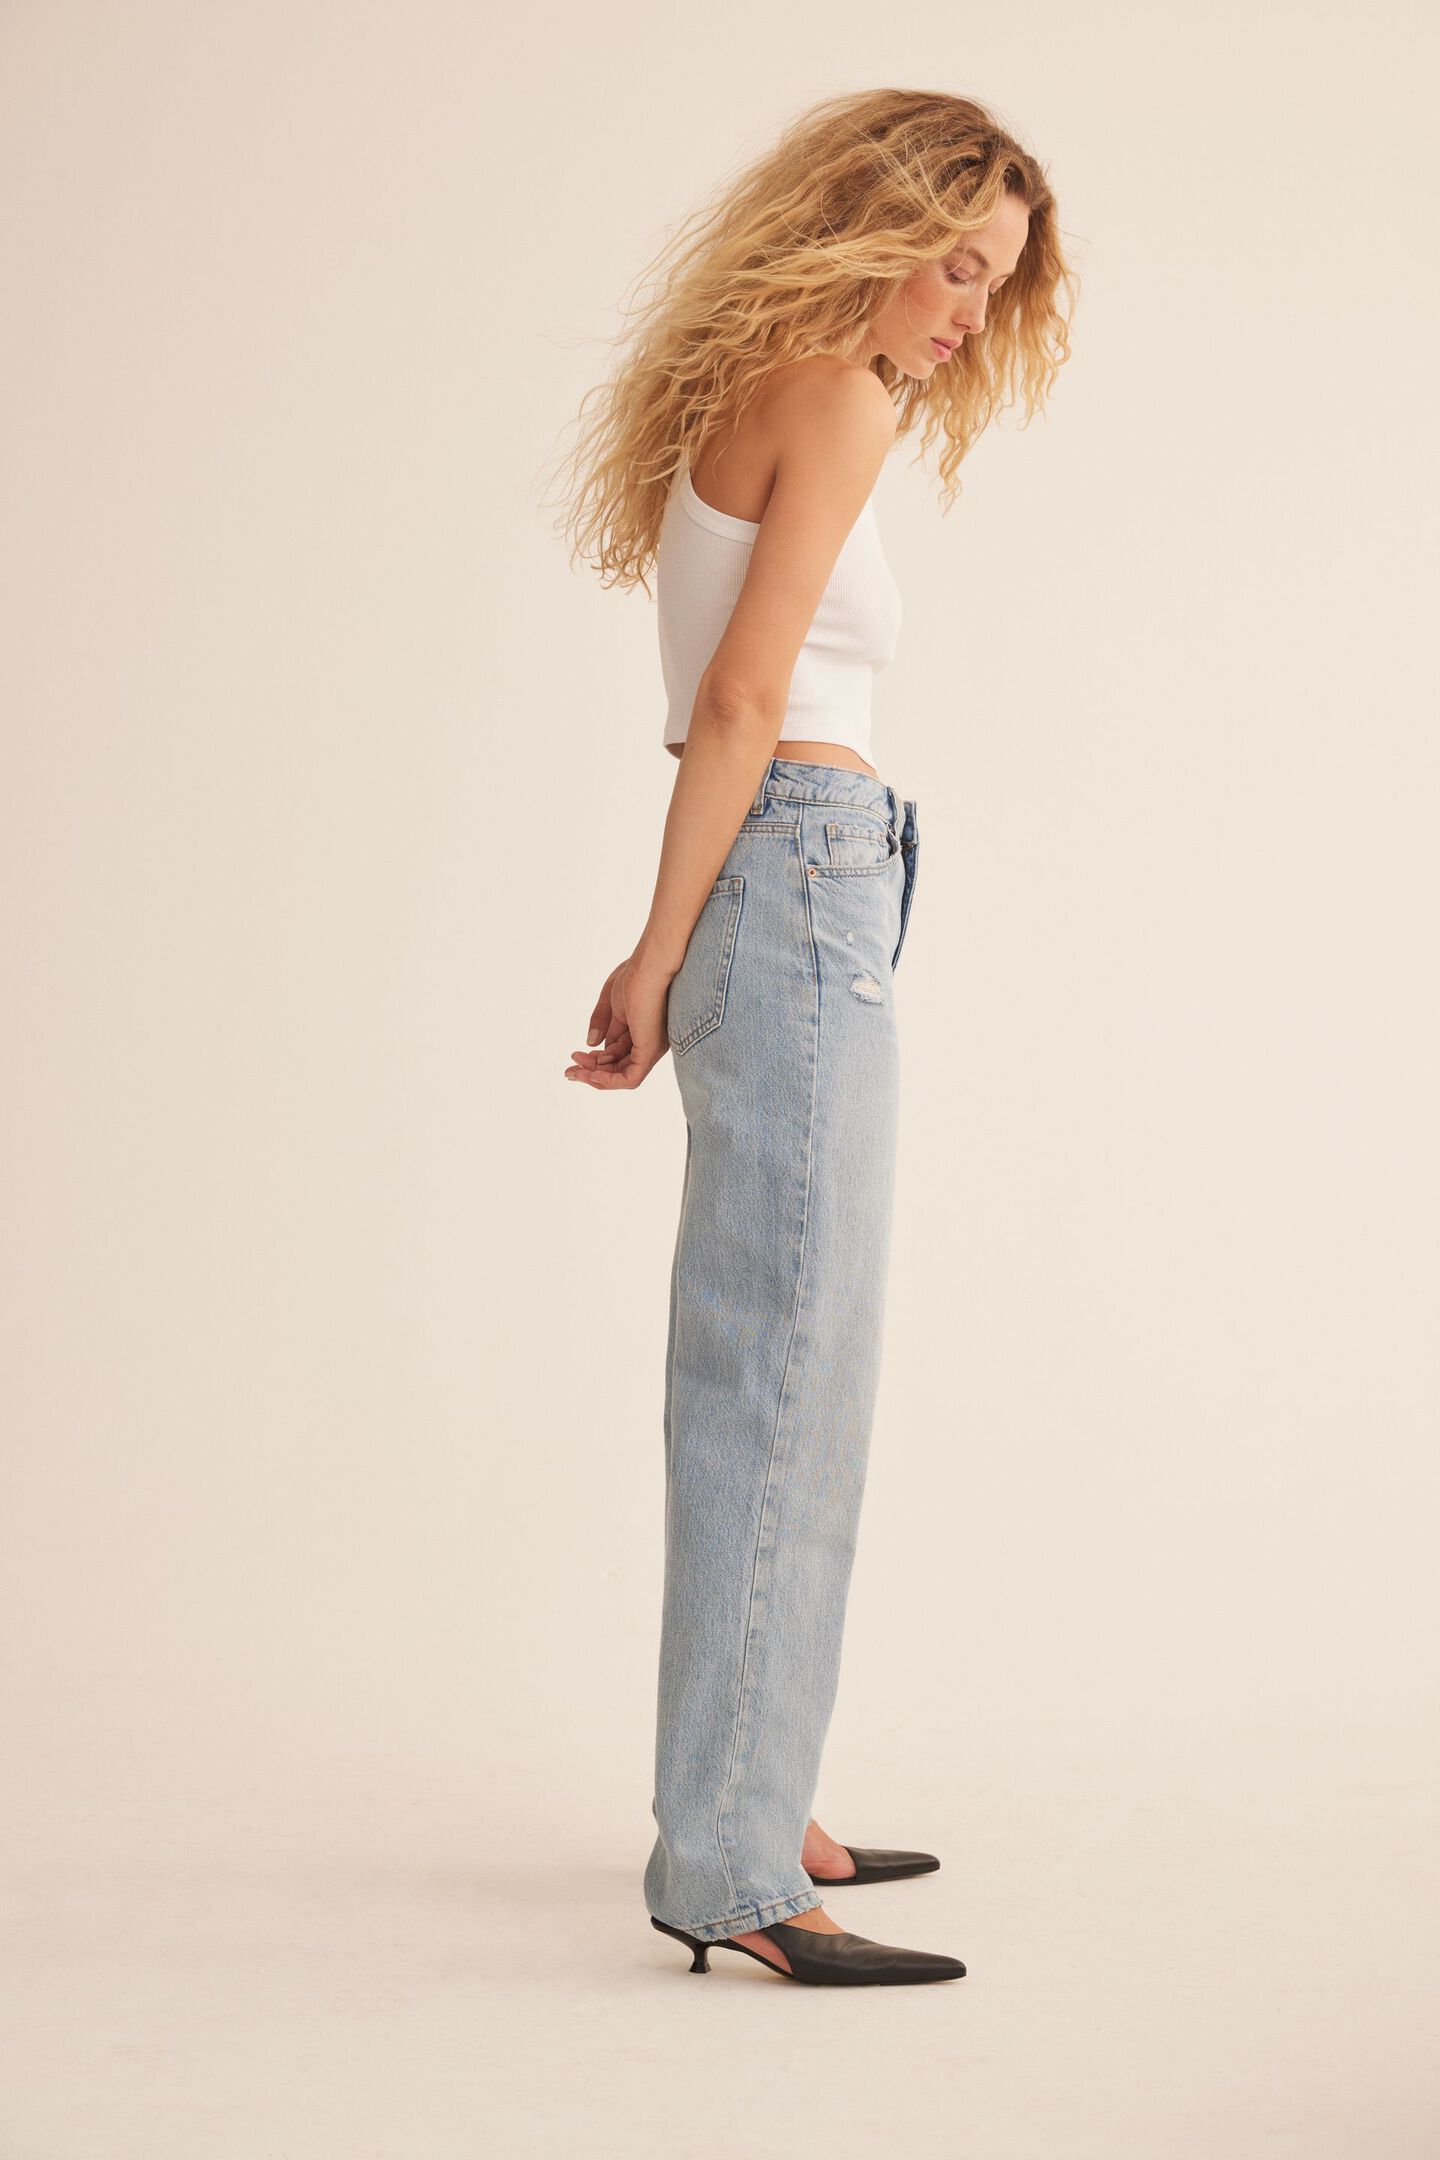 ETHOS | Amber '90s Loose Jeans | Dynamite